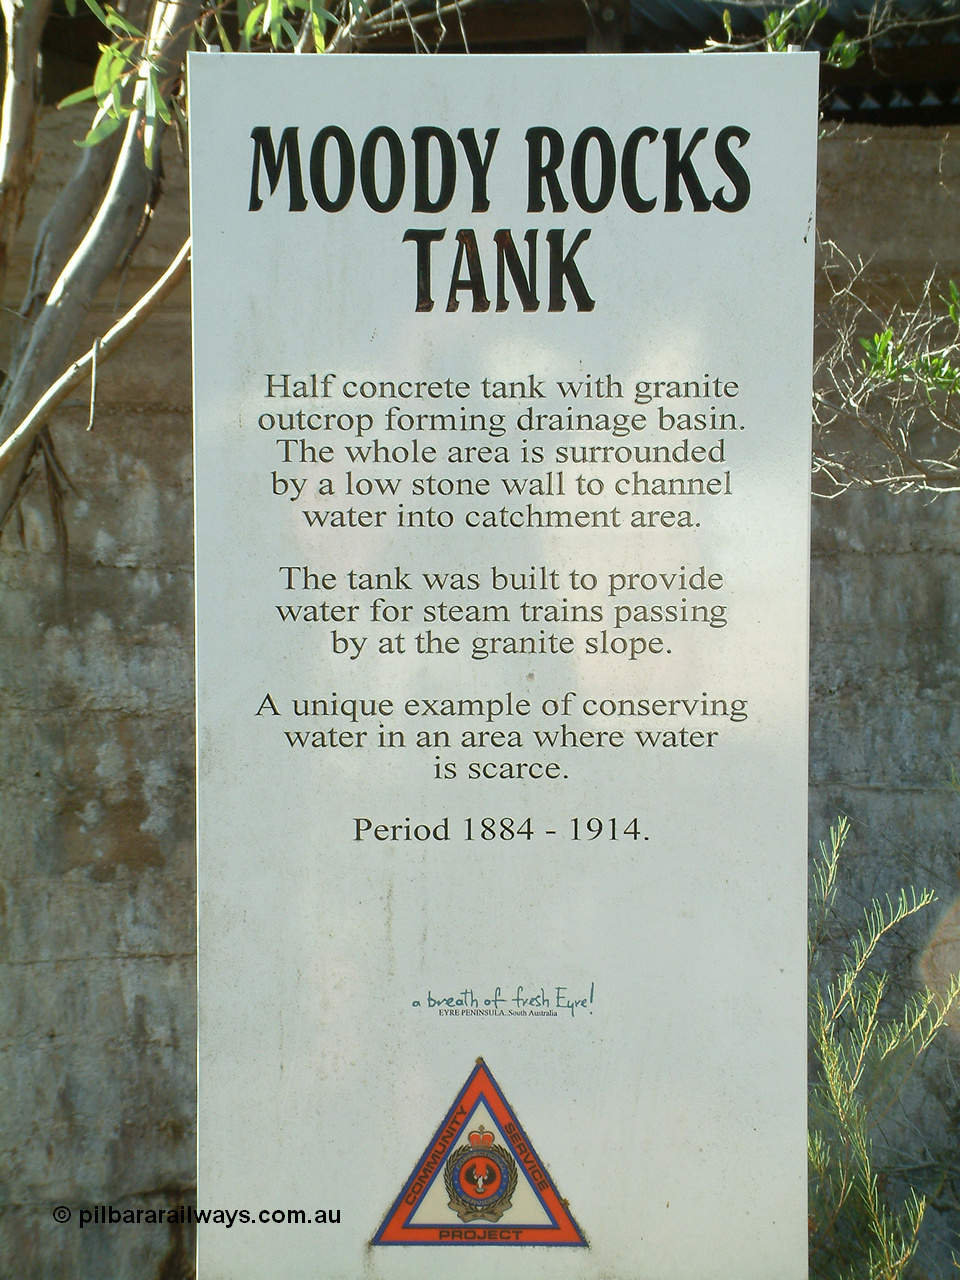 030409 155530
Moody Tank, signage outlining function.
